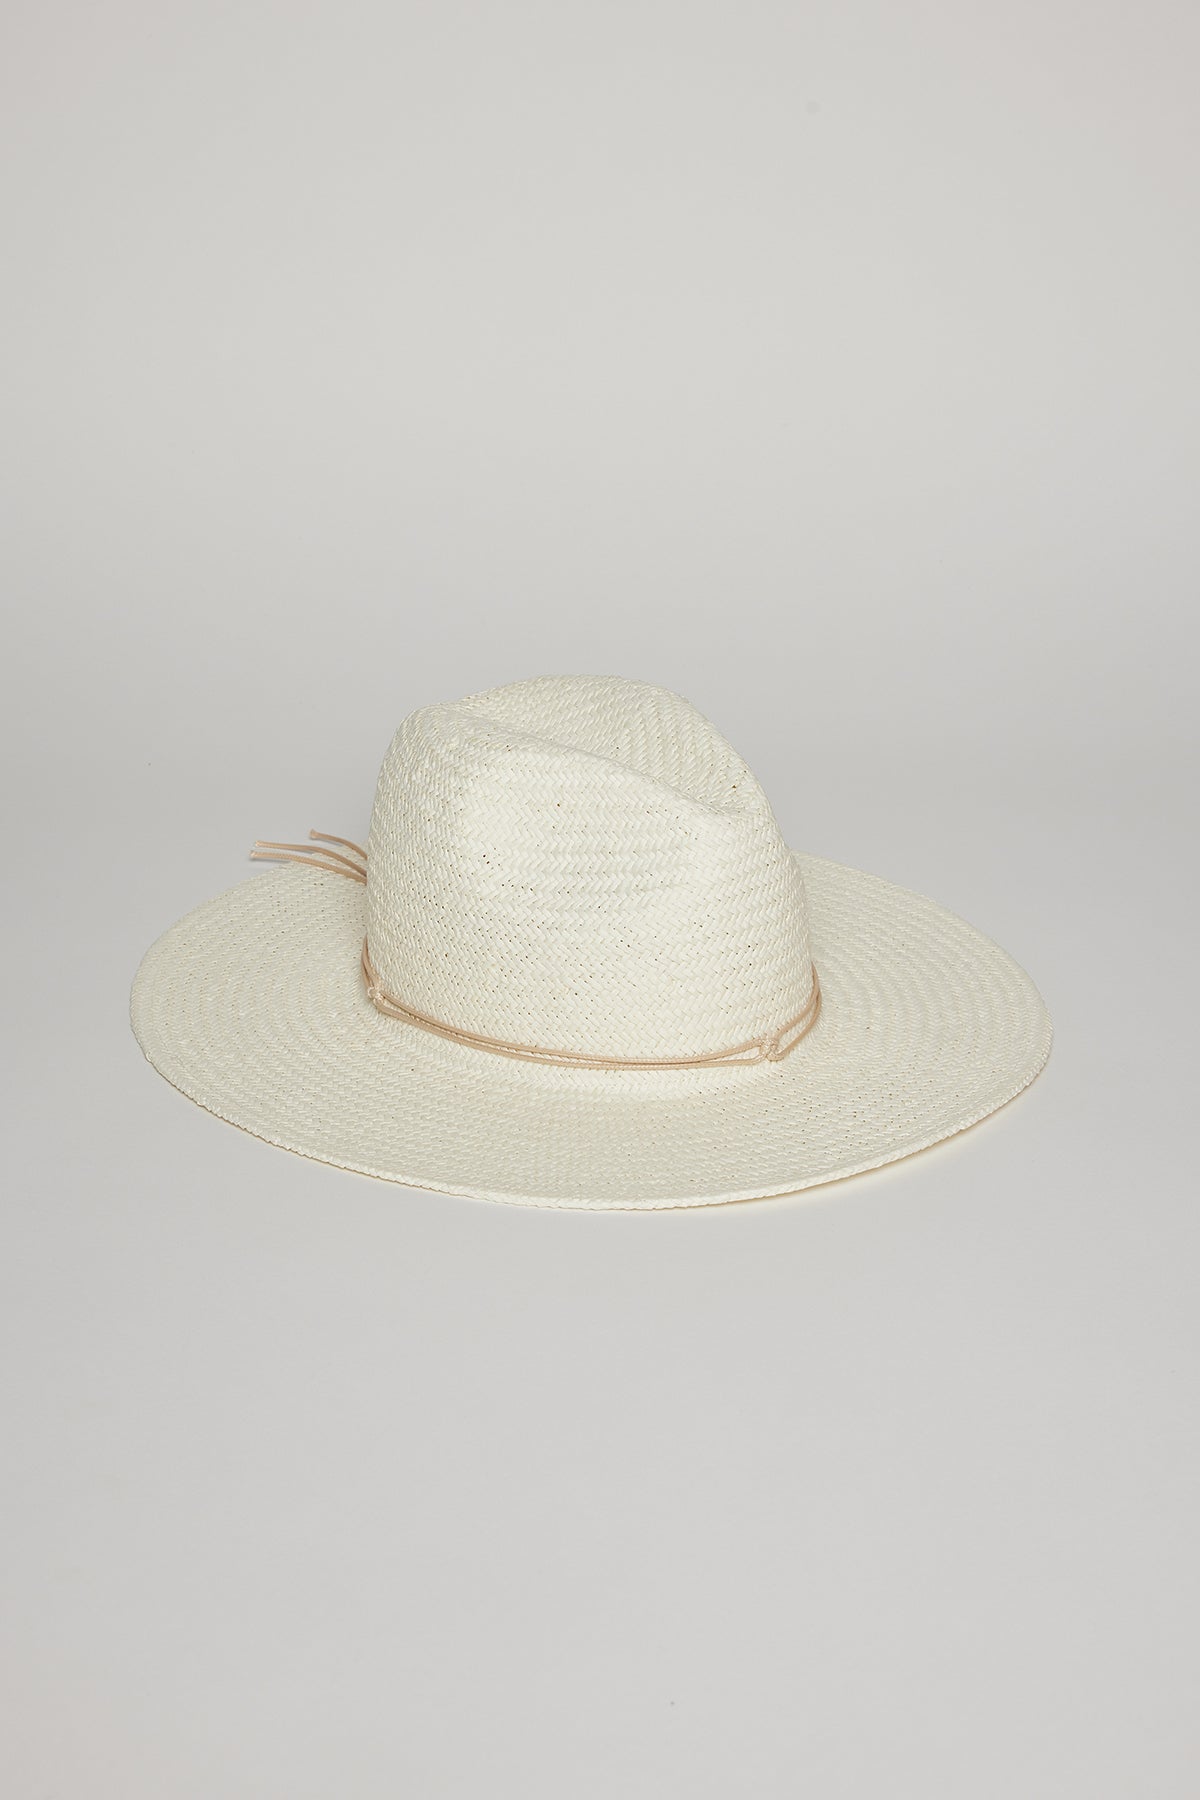 A white, wide-brimmed TRAVELER CONTINENTAL HAT by Velvet by Graham & Spencer with a beige band around the base of the crown, placed on a light grey surface.-36290936078529